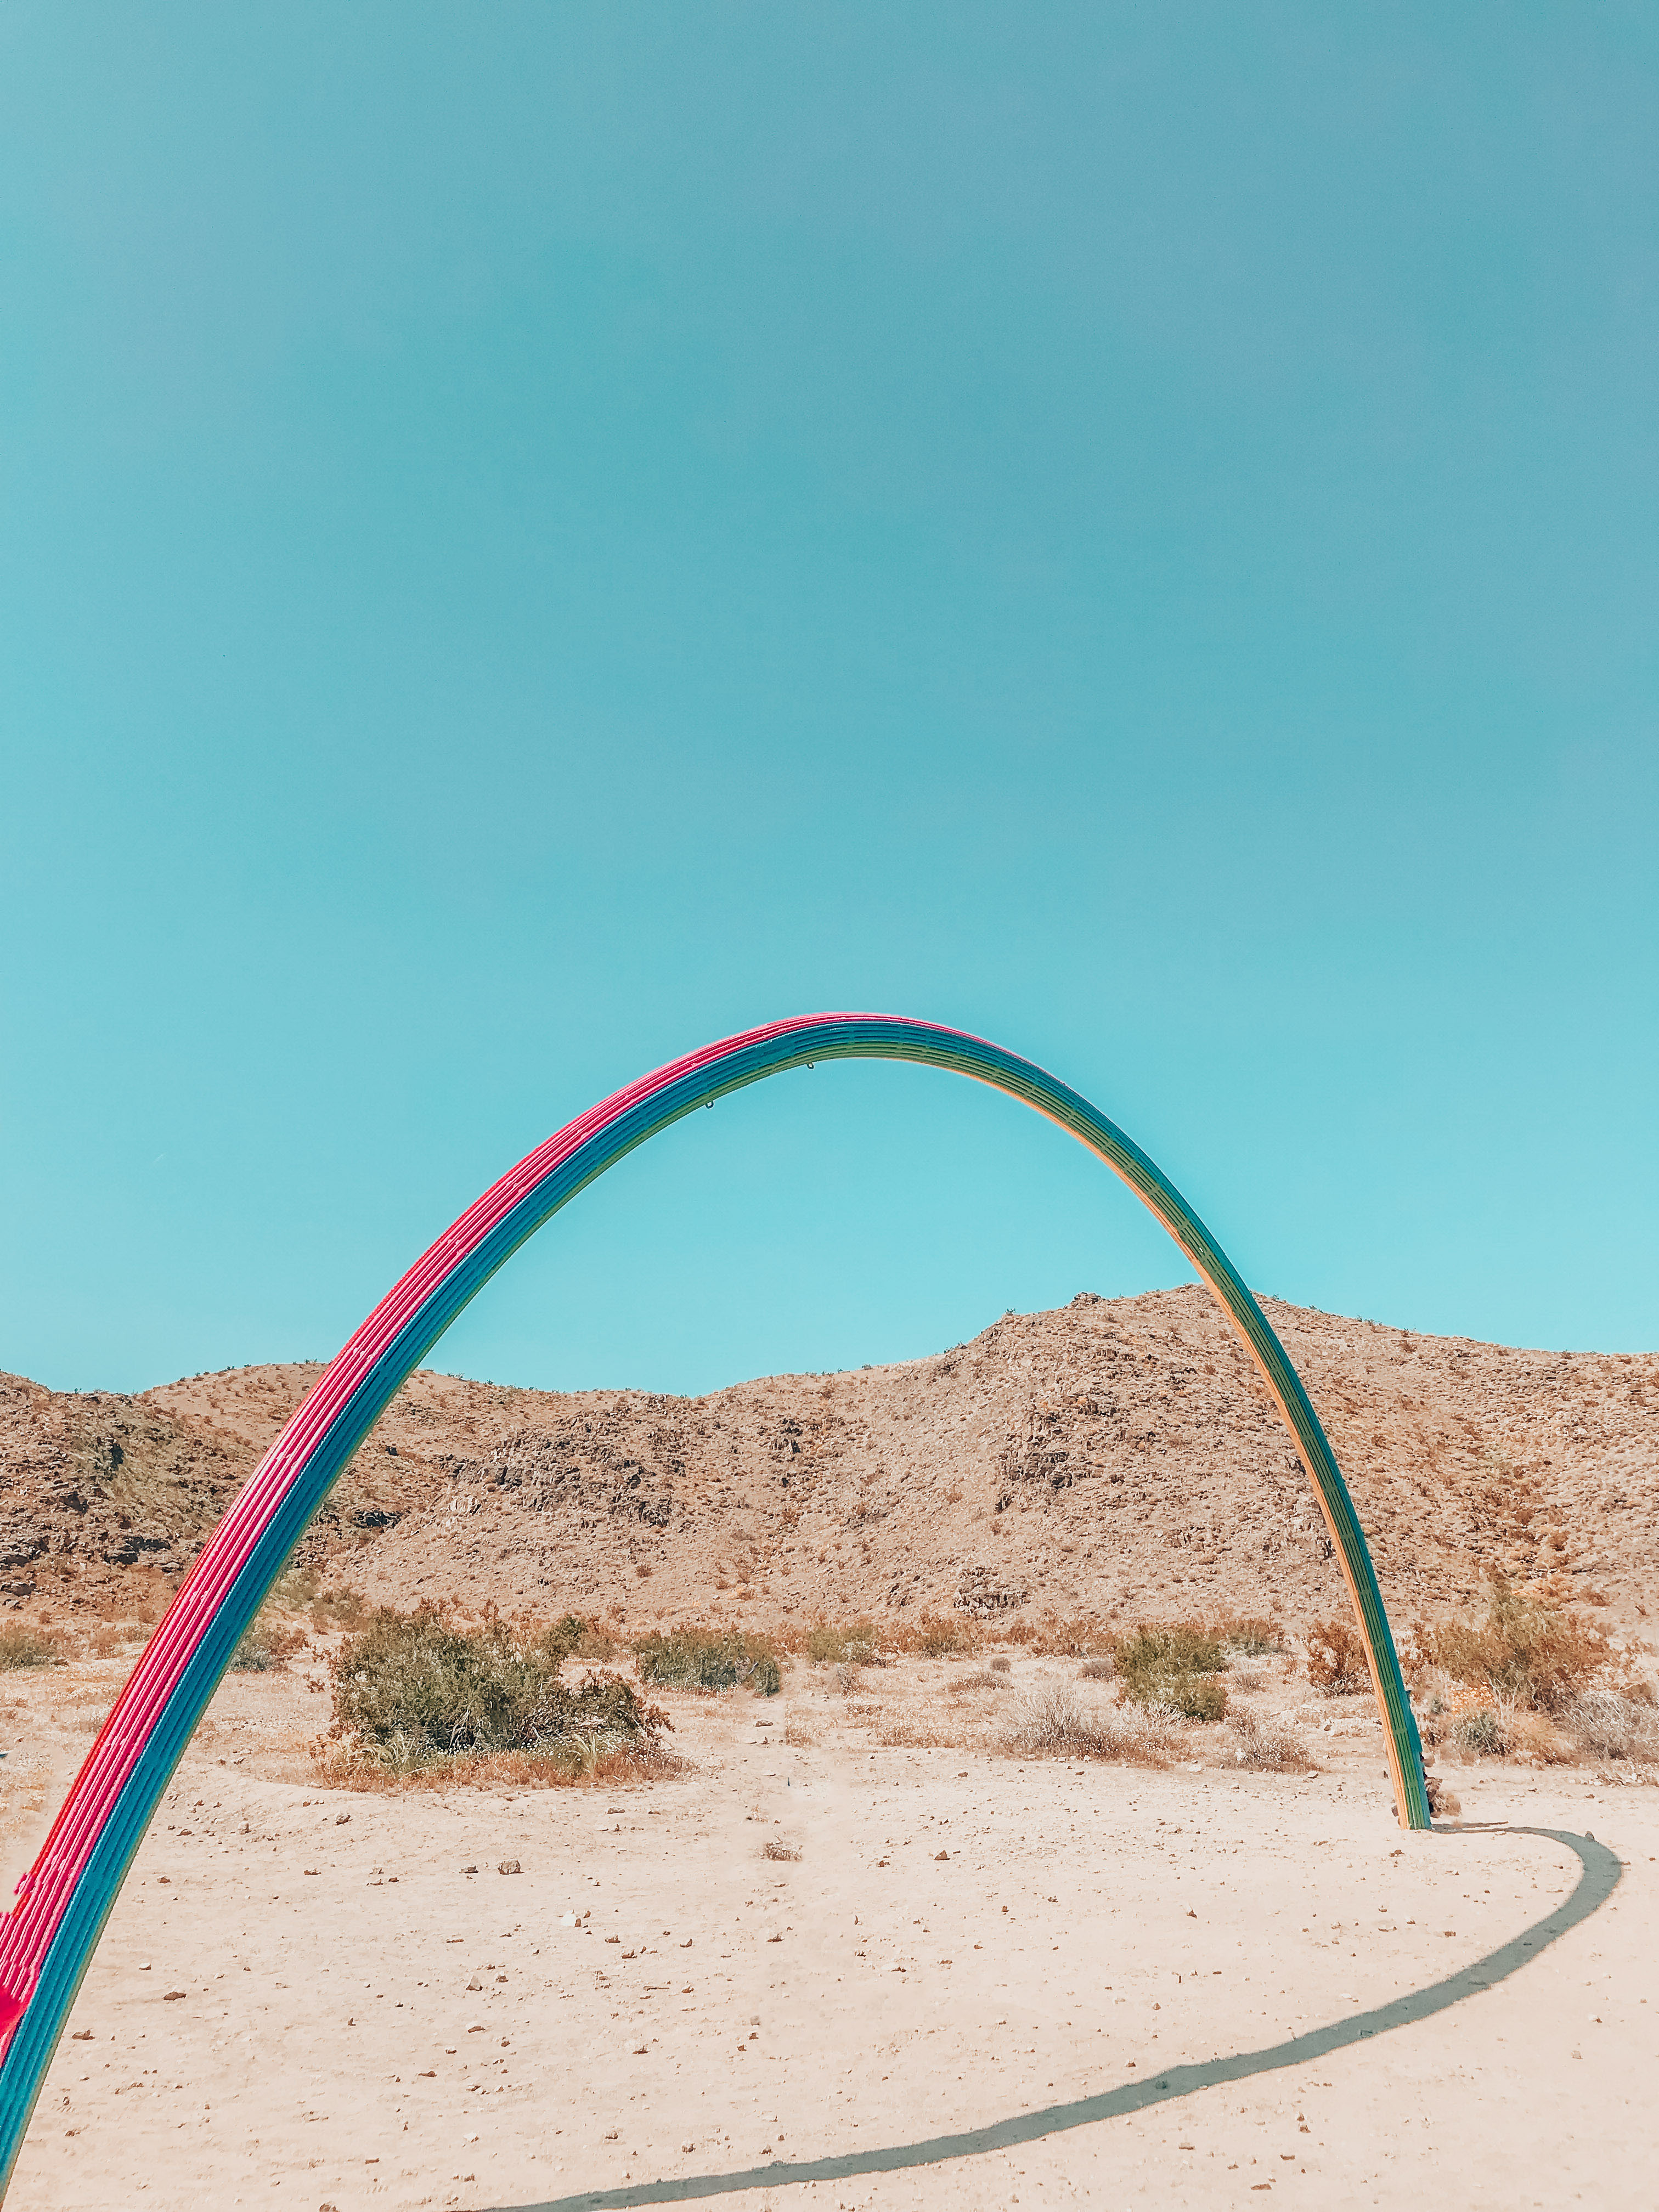 Lover's Rainbow in Rancho Mirage, part of Desert X project 2019.